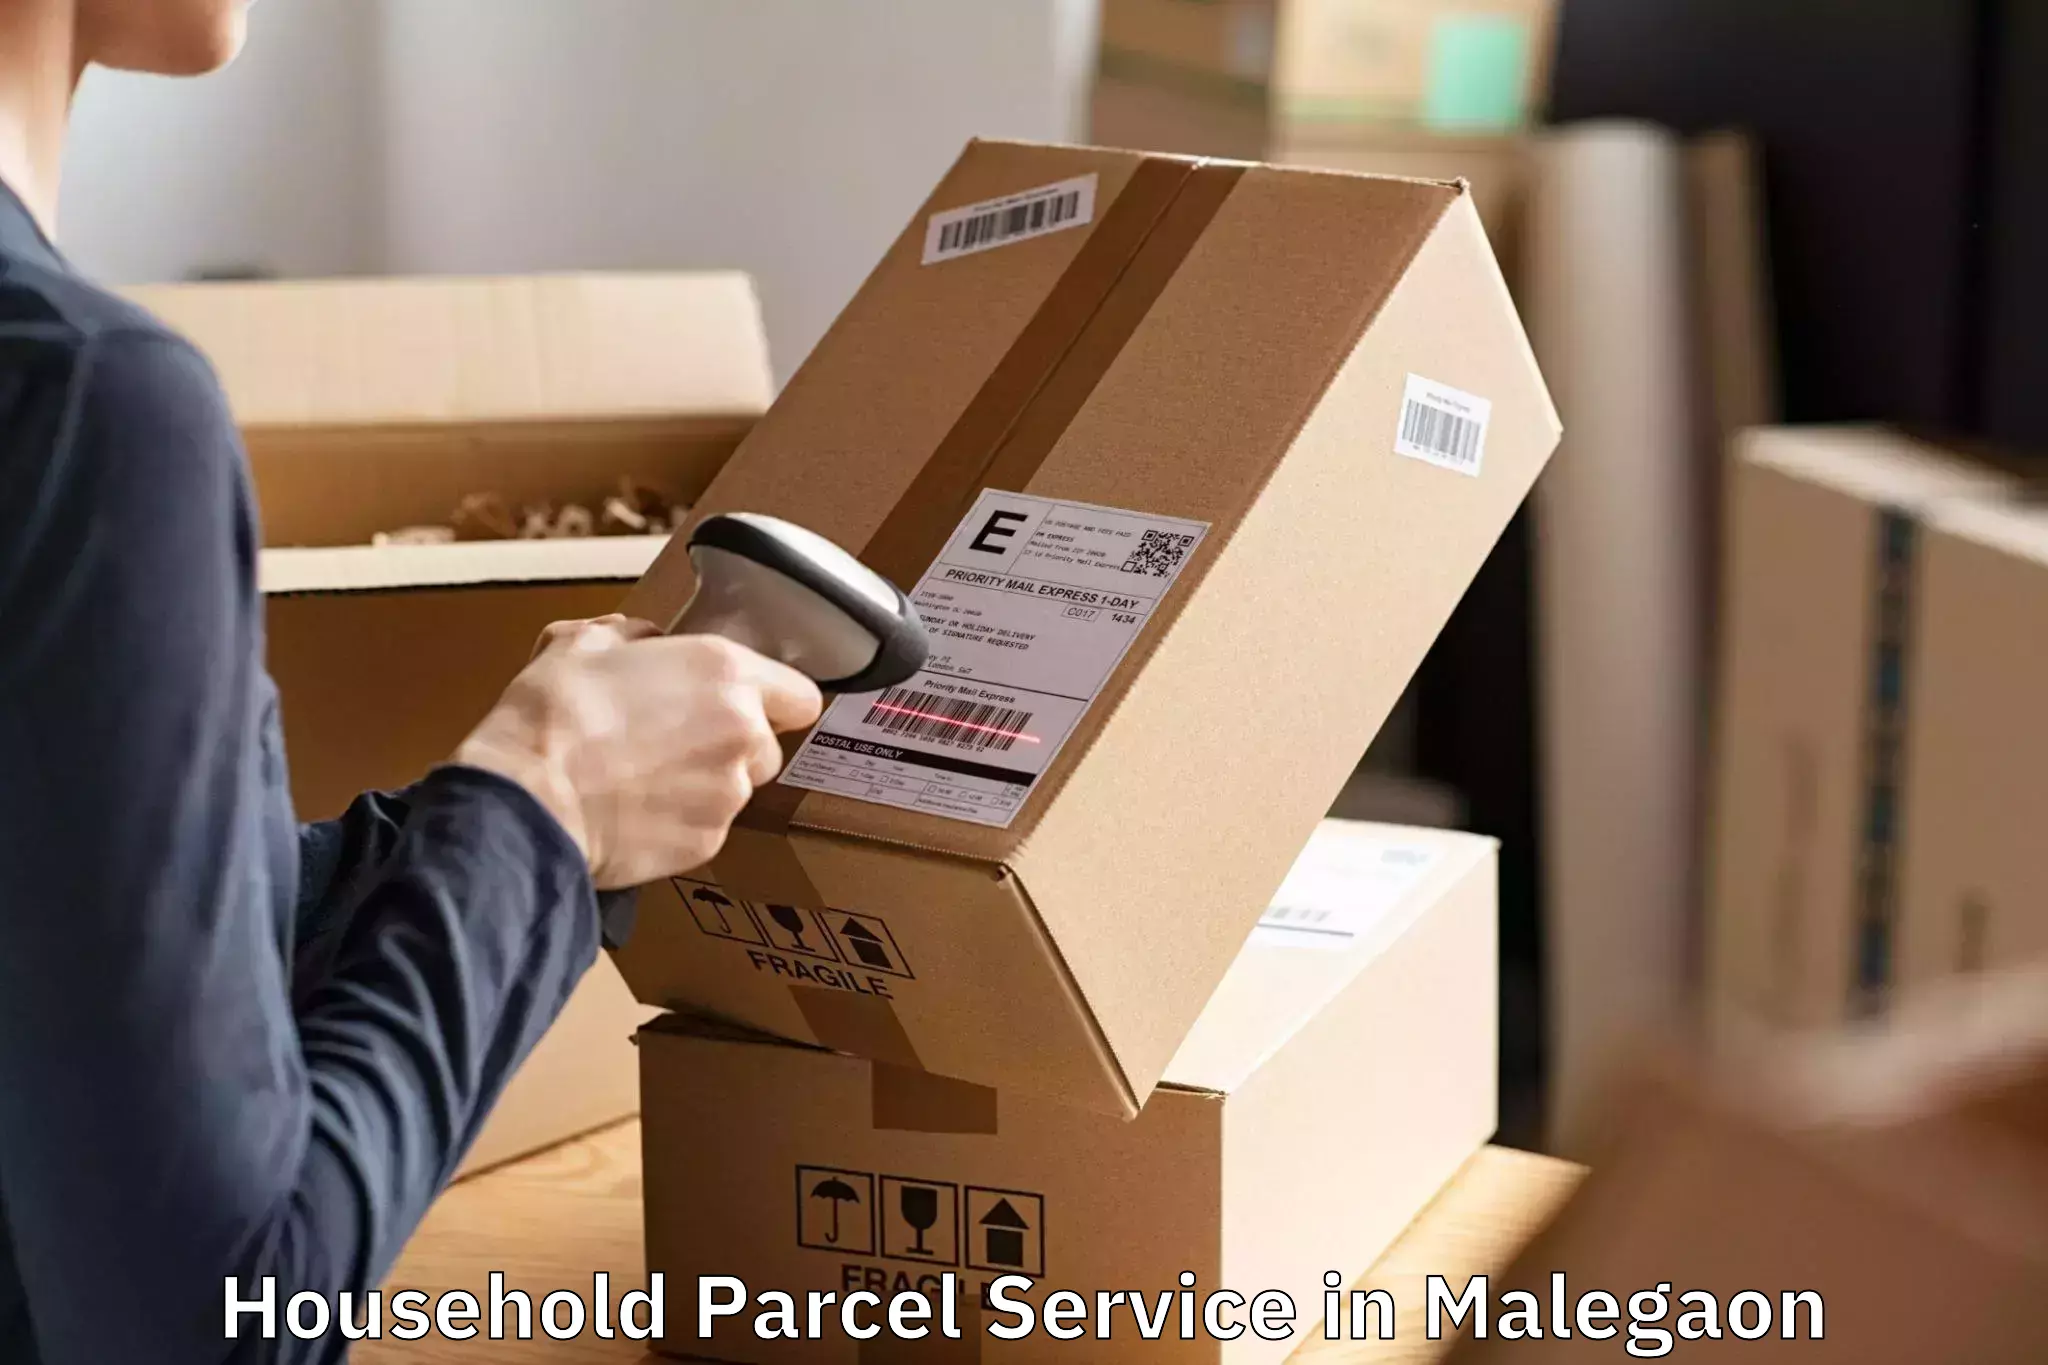 Easy Household Parcel Service Booking in Malegaon, Maharashtra (MH)